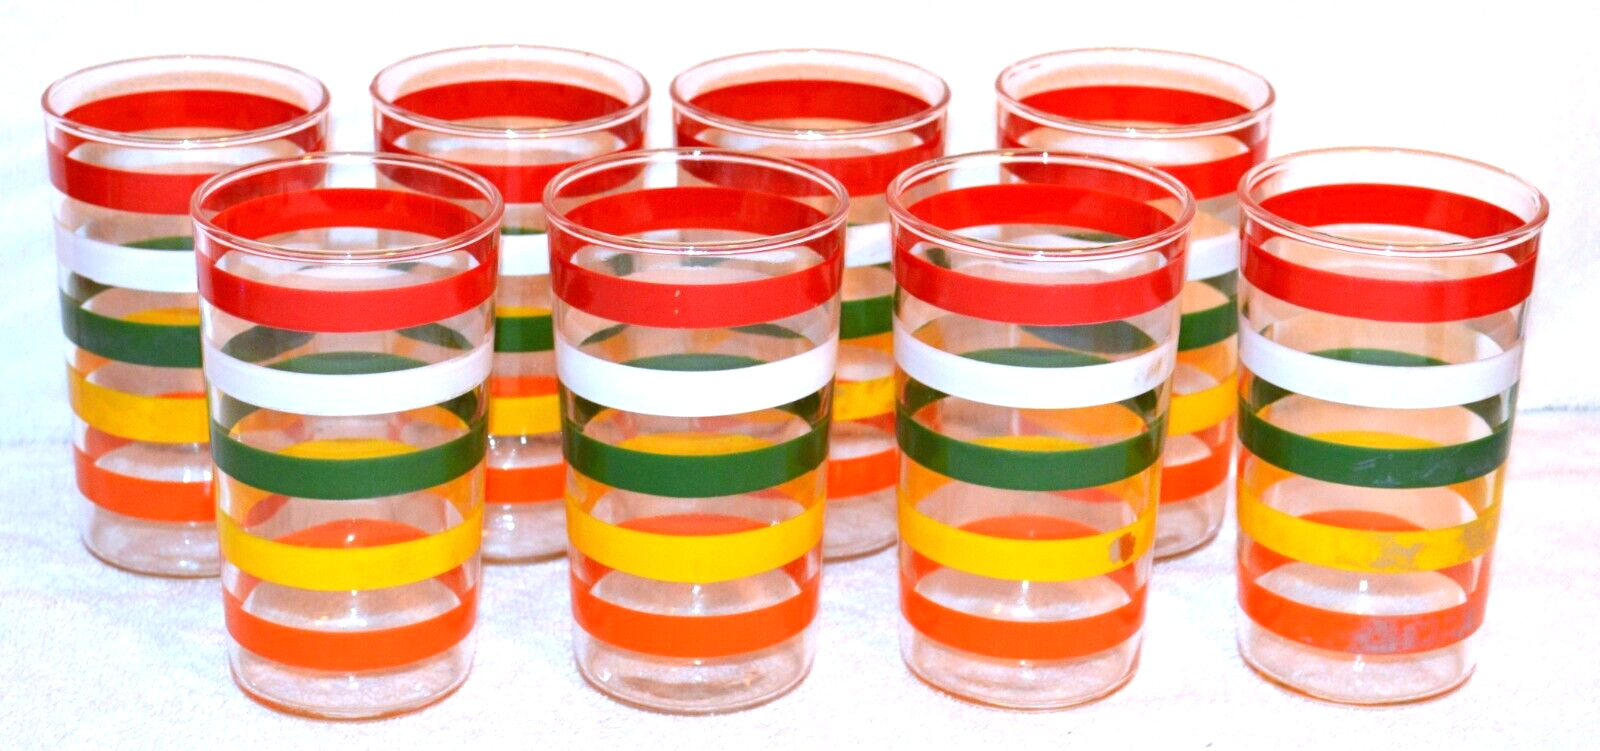 8 VINTAGE ANCHOR HOCKING STRIPED GLASSES FIESTA BANDS 8 OUNCE MCM TUMBLERS